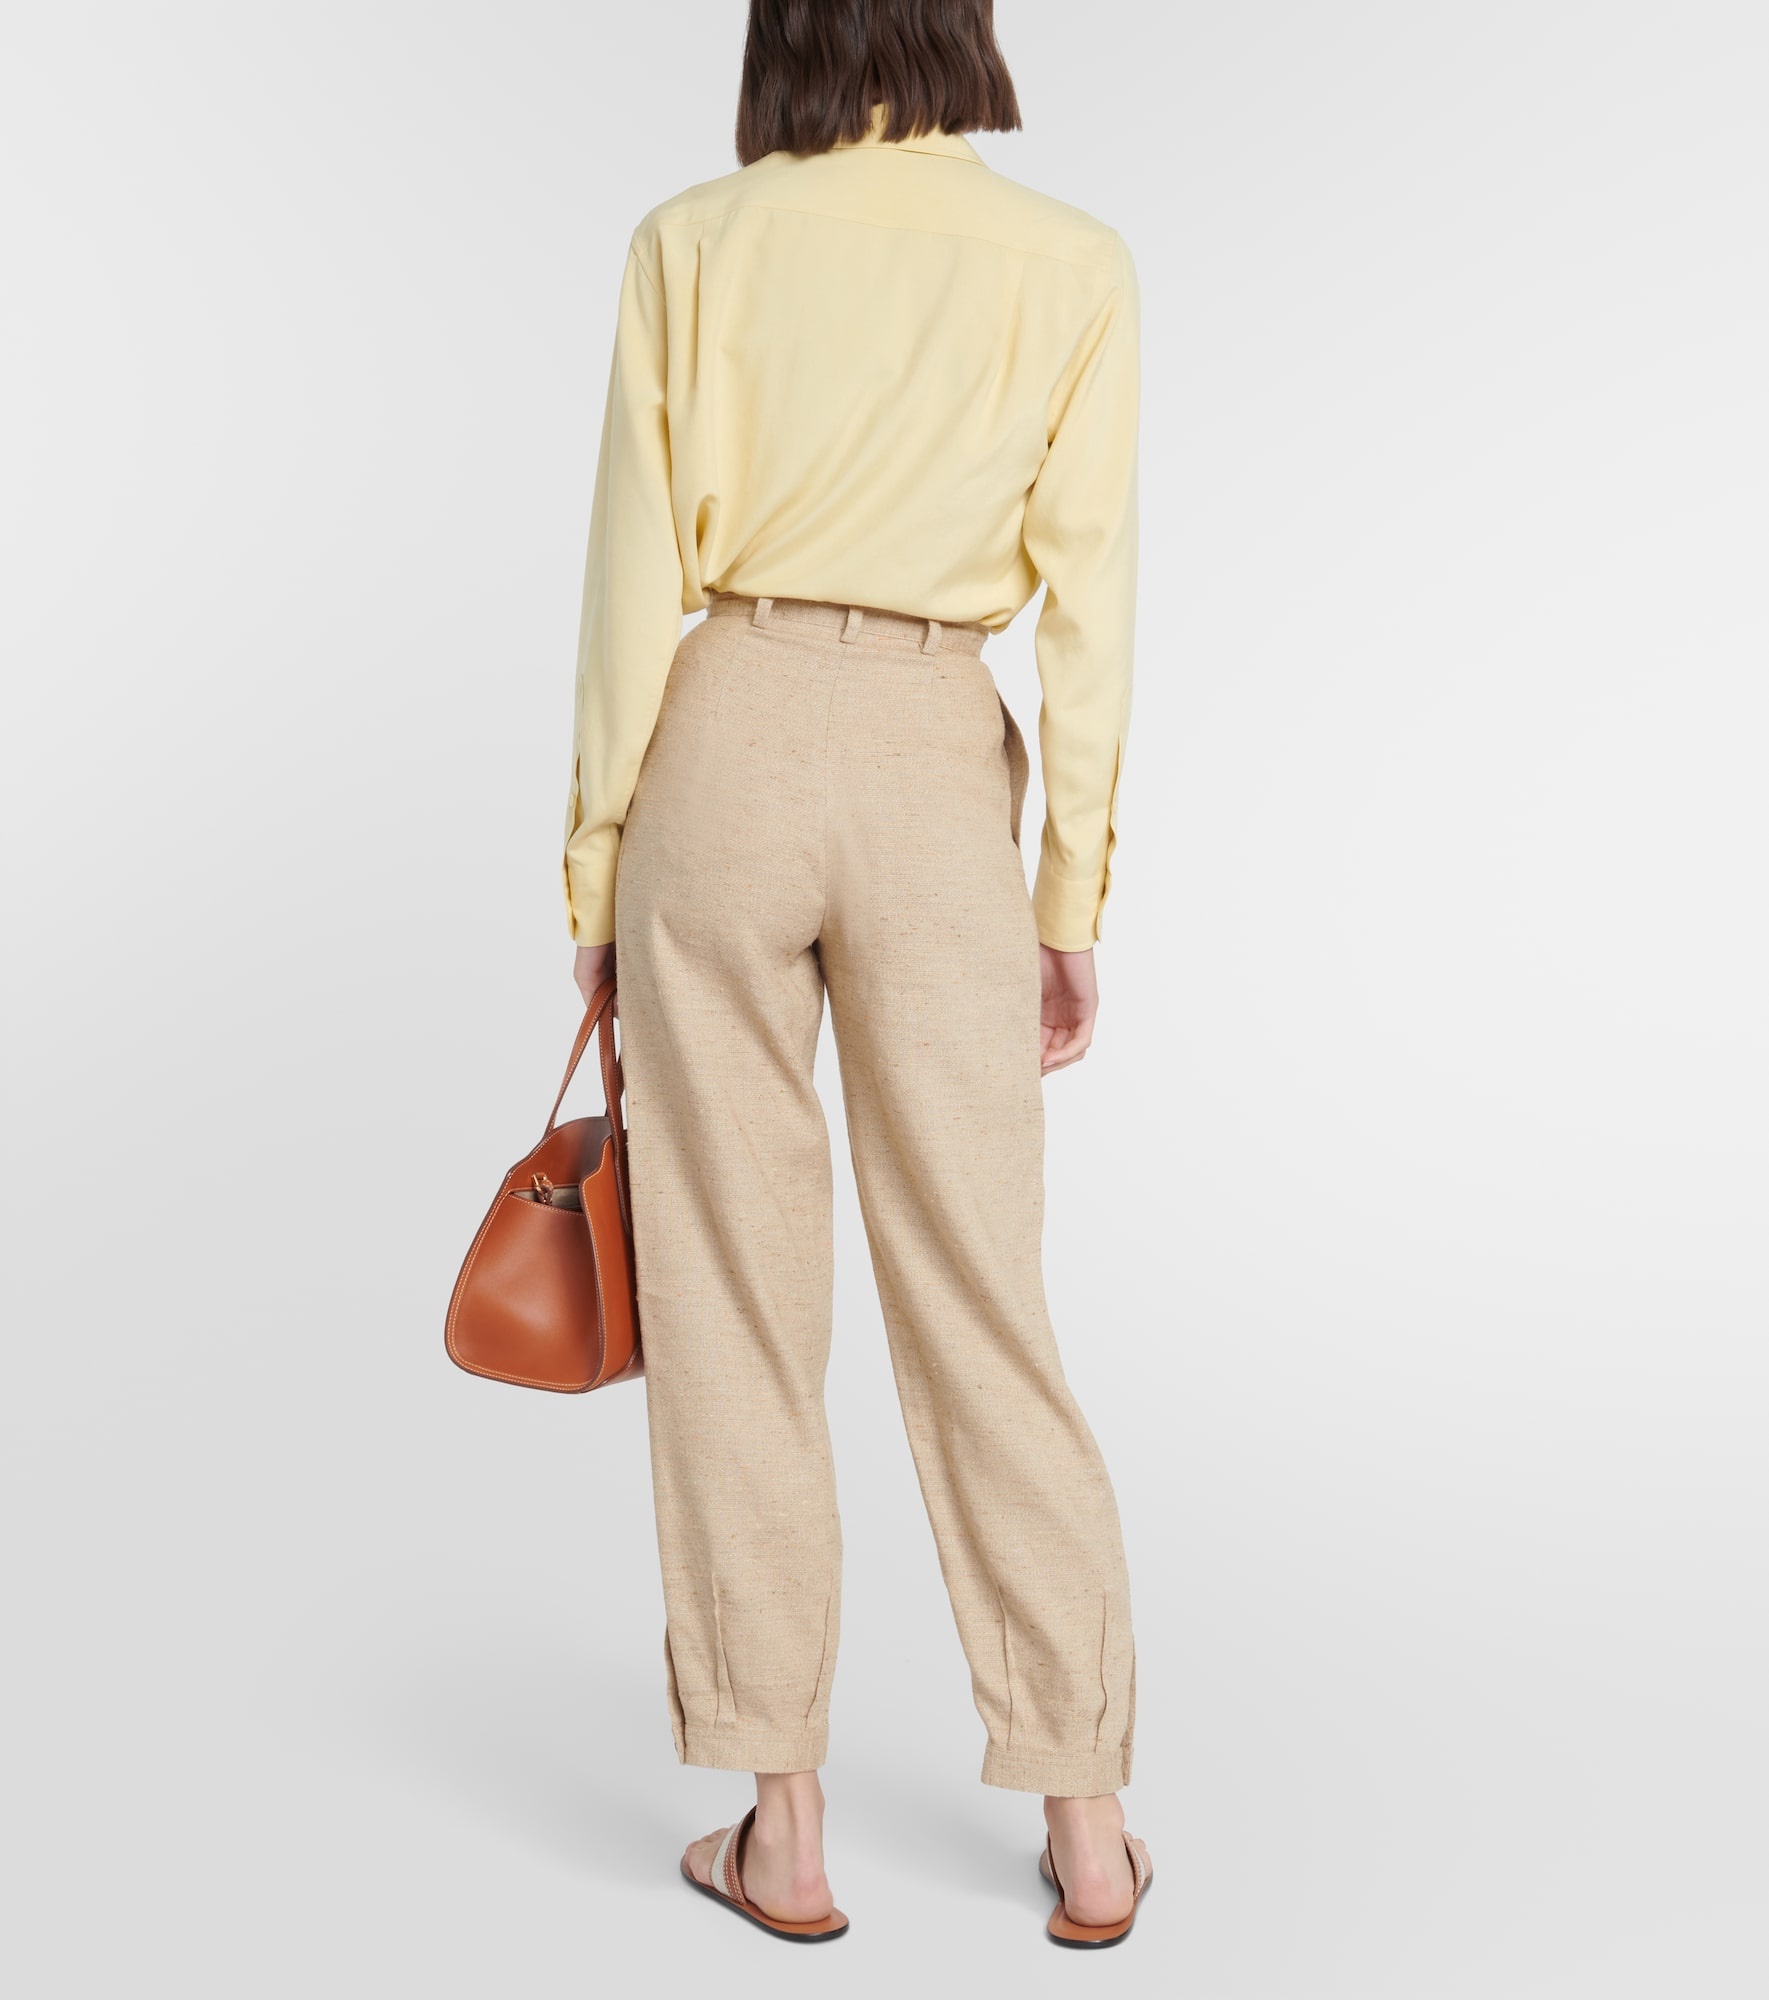 Linen, cashmere, and silk pants - 3